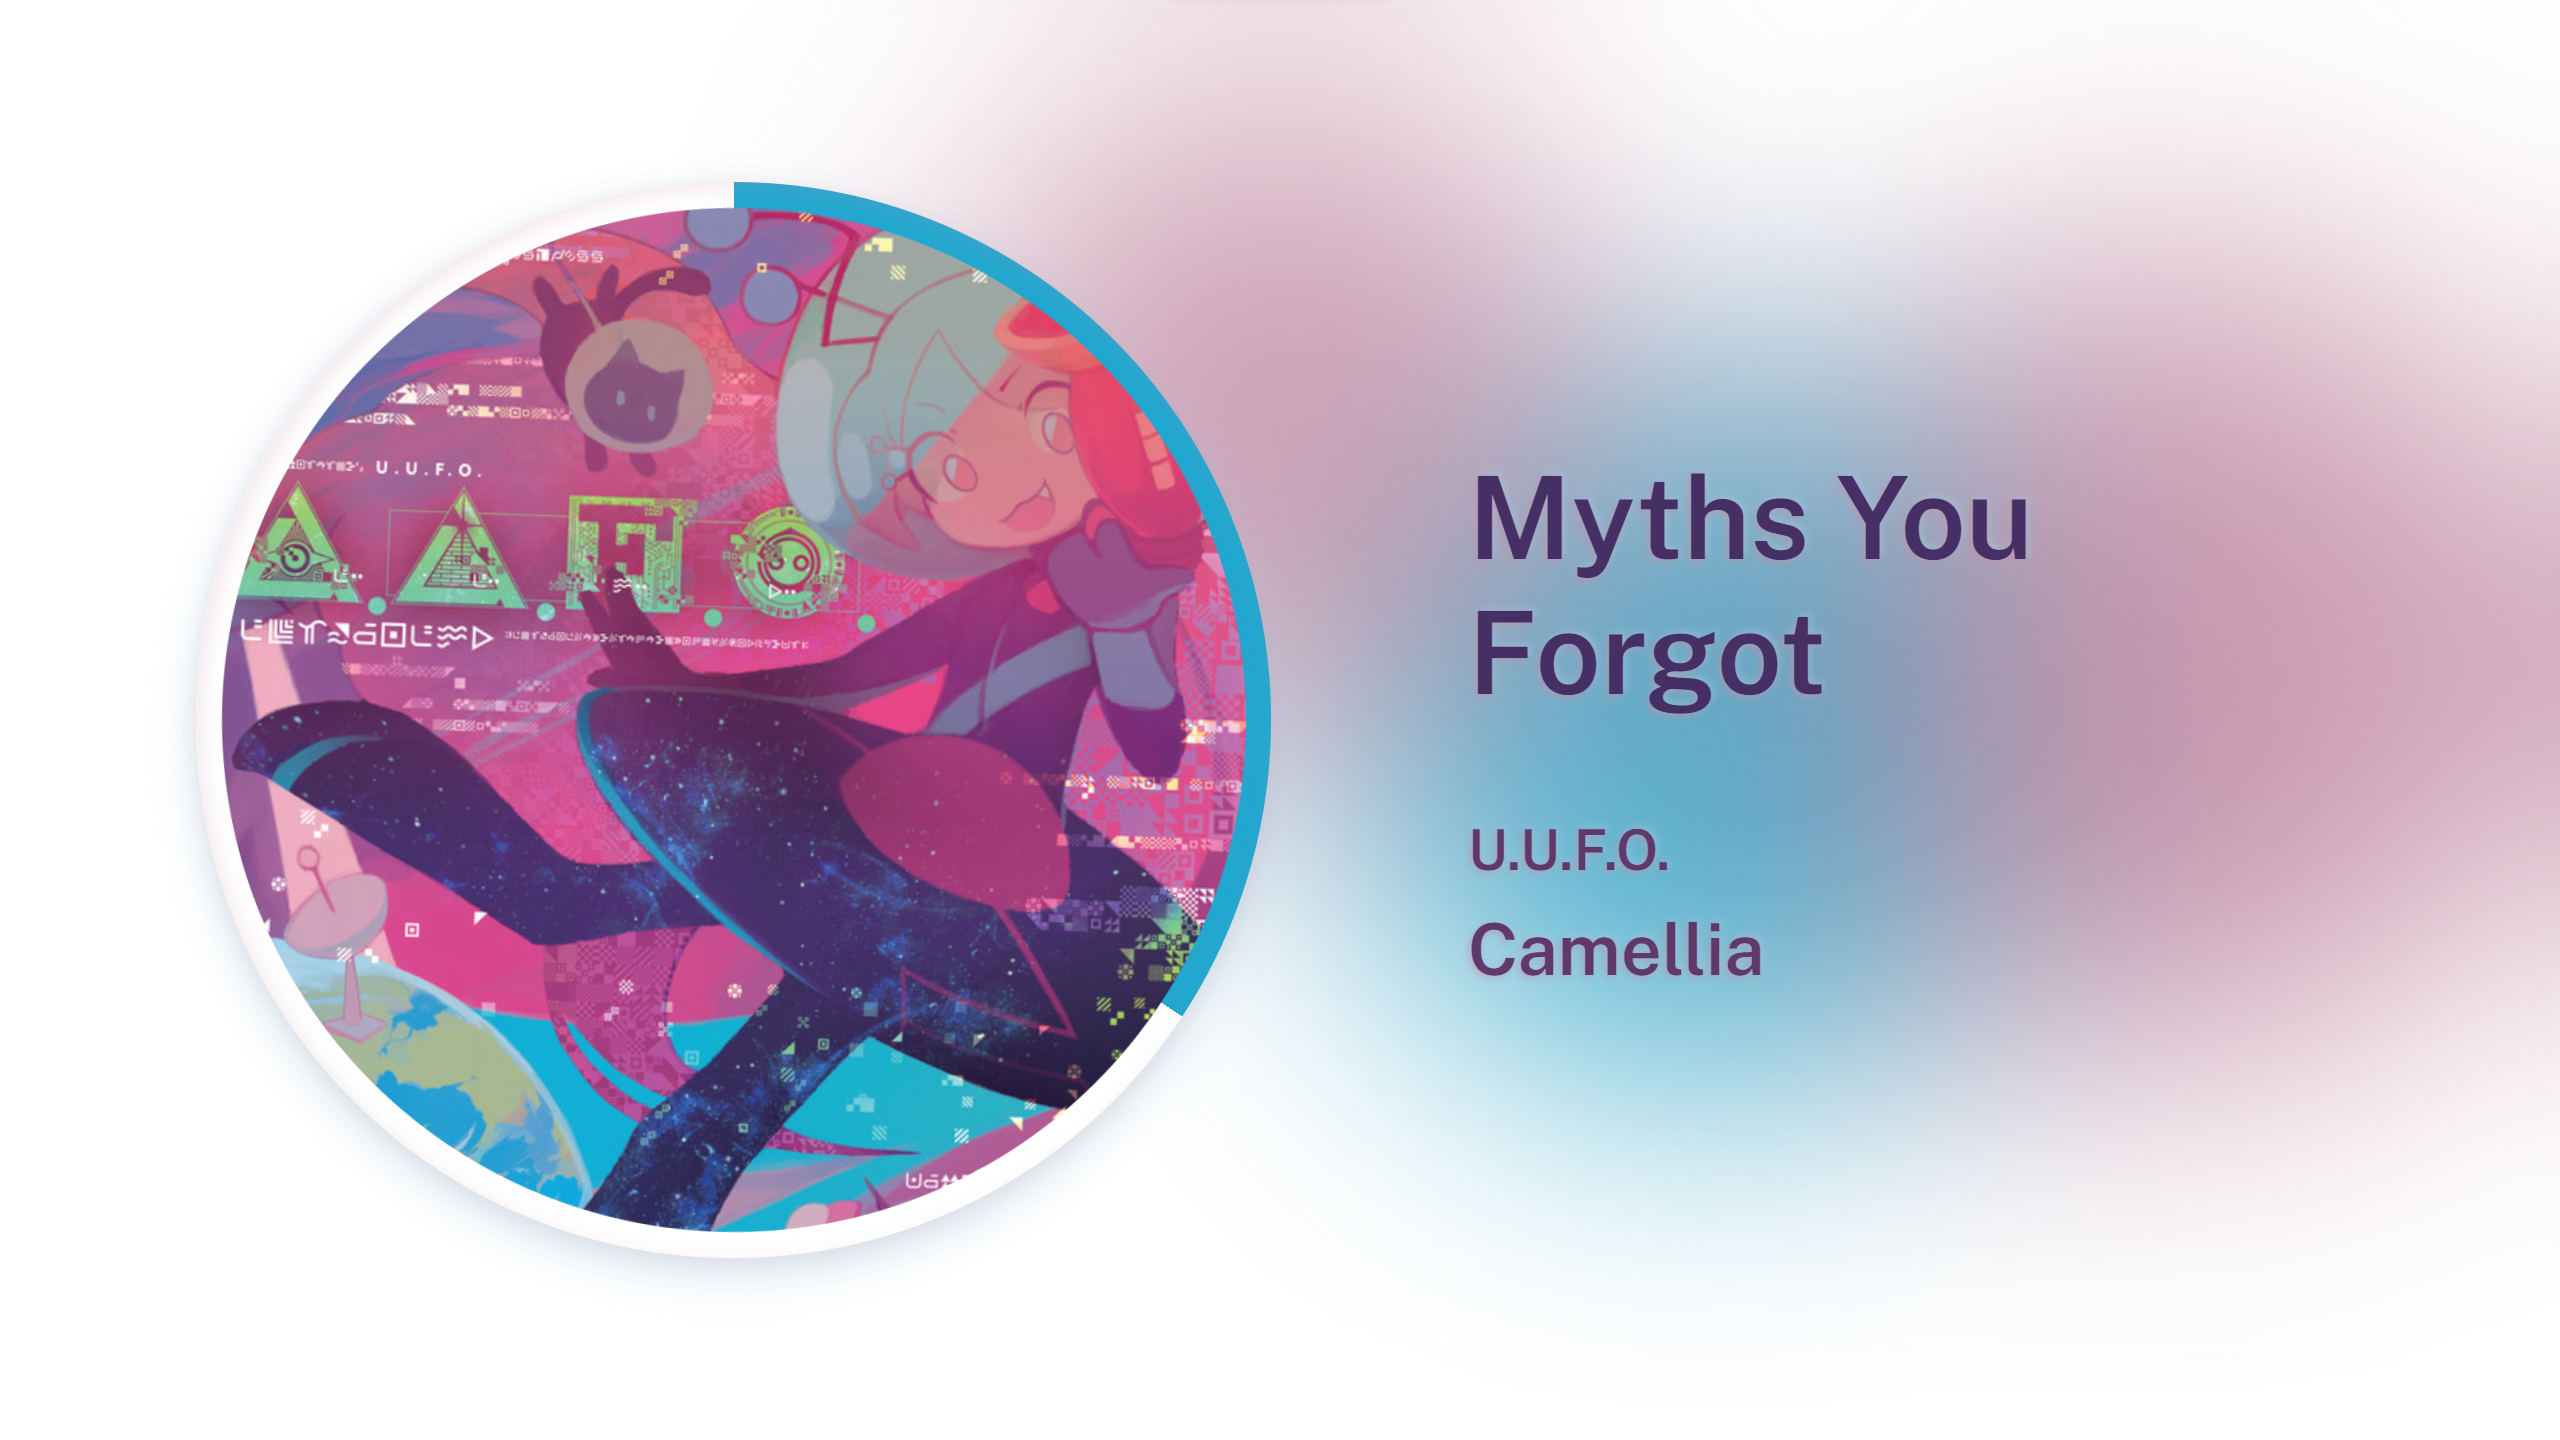 Myths You Forgot by Camellia and Toby Fox